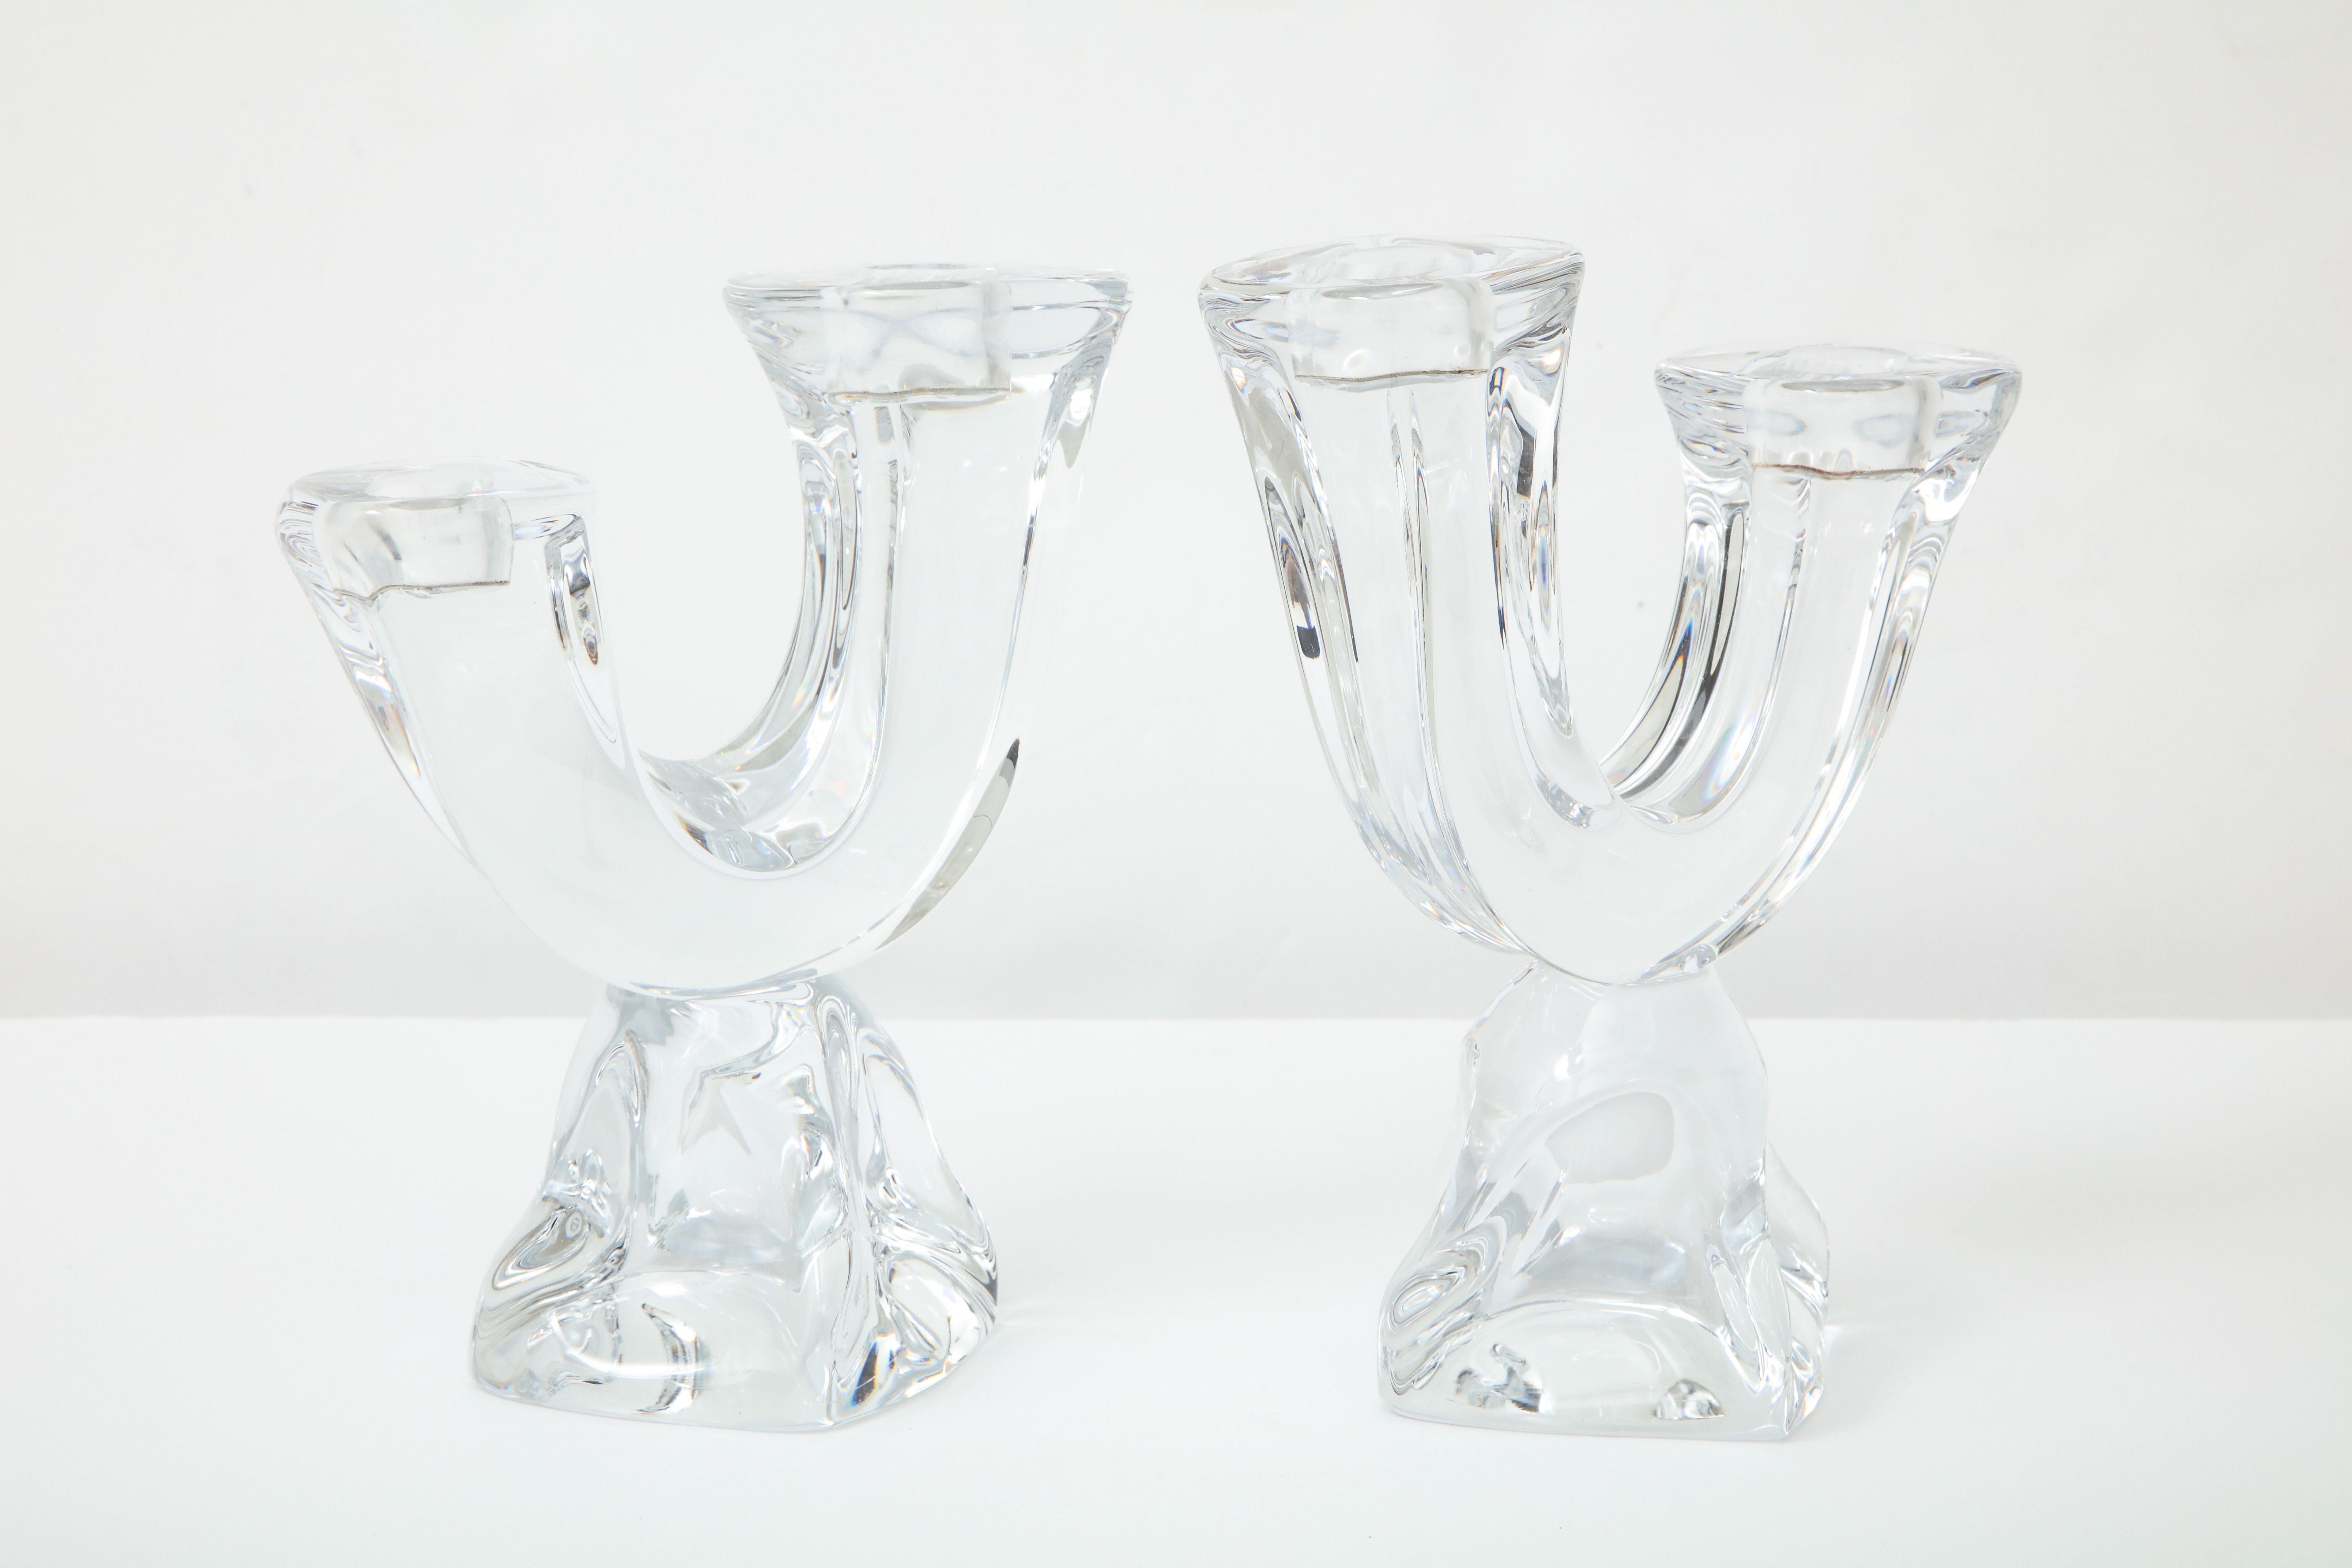 Pair of moderist solid crystal candlesticks each holding 2 candles, Daum crystal. Signed.